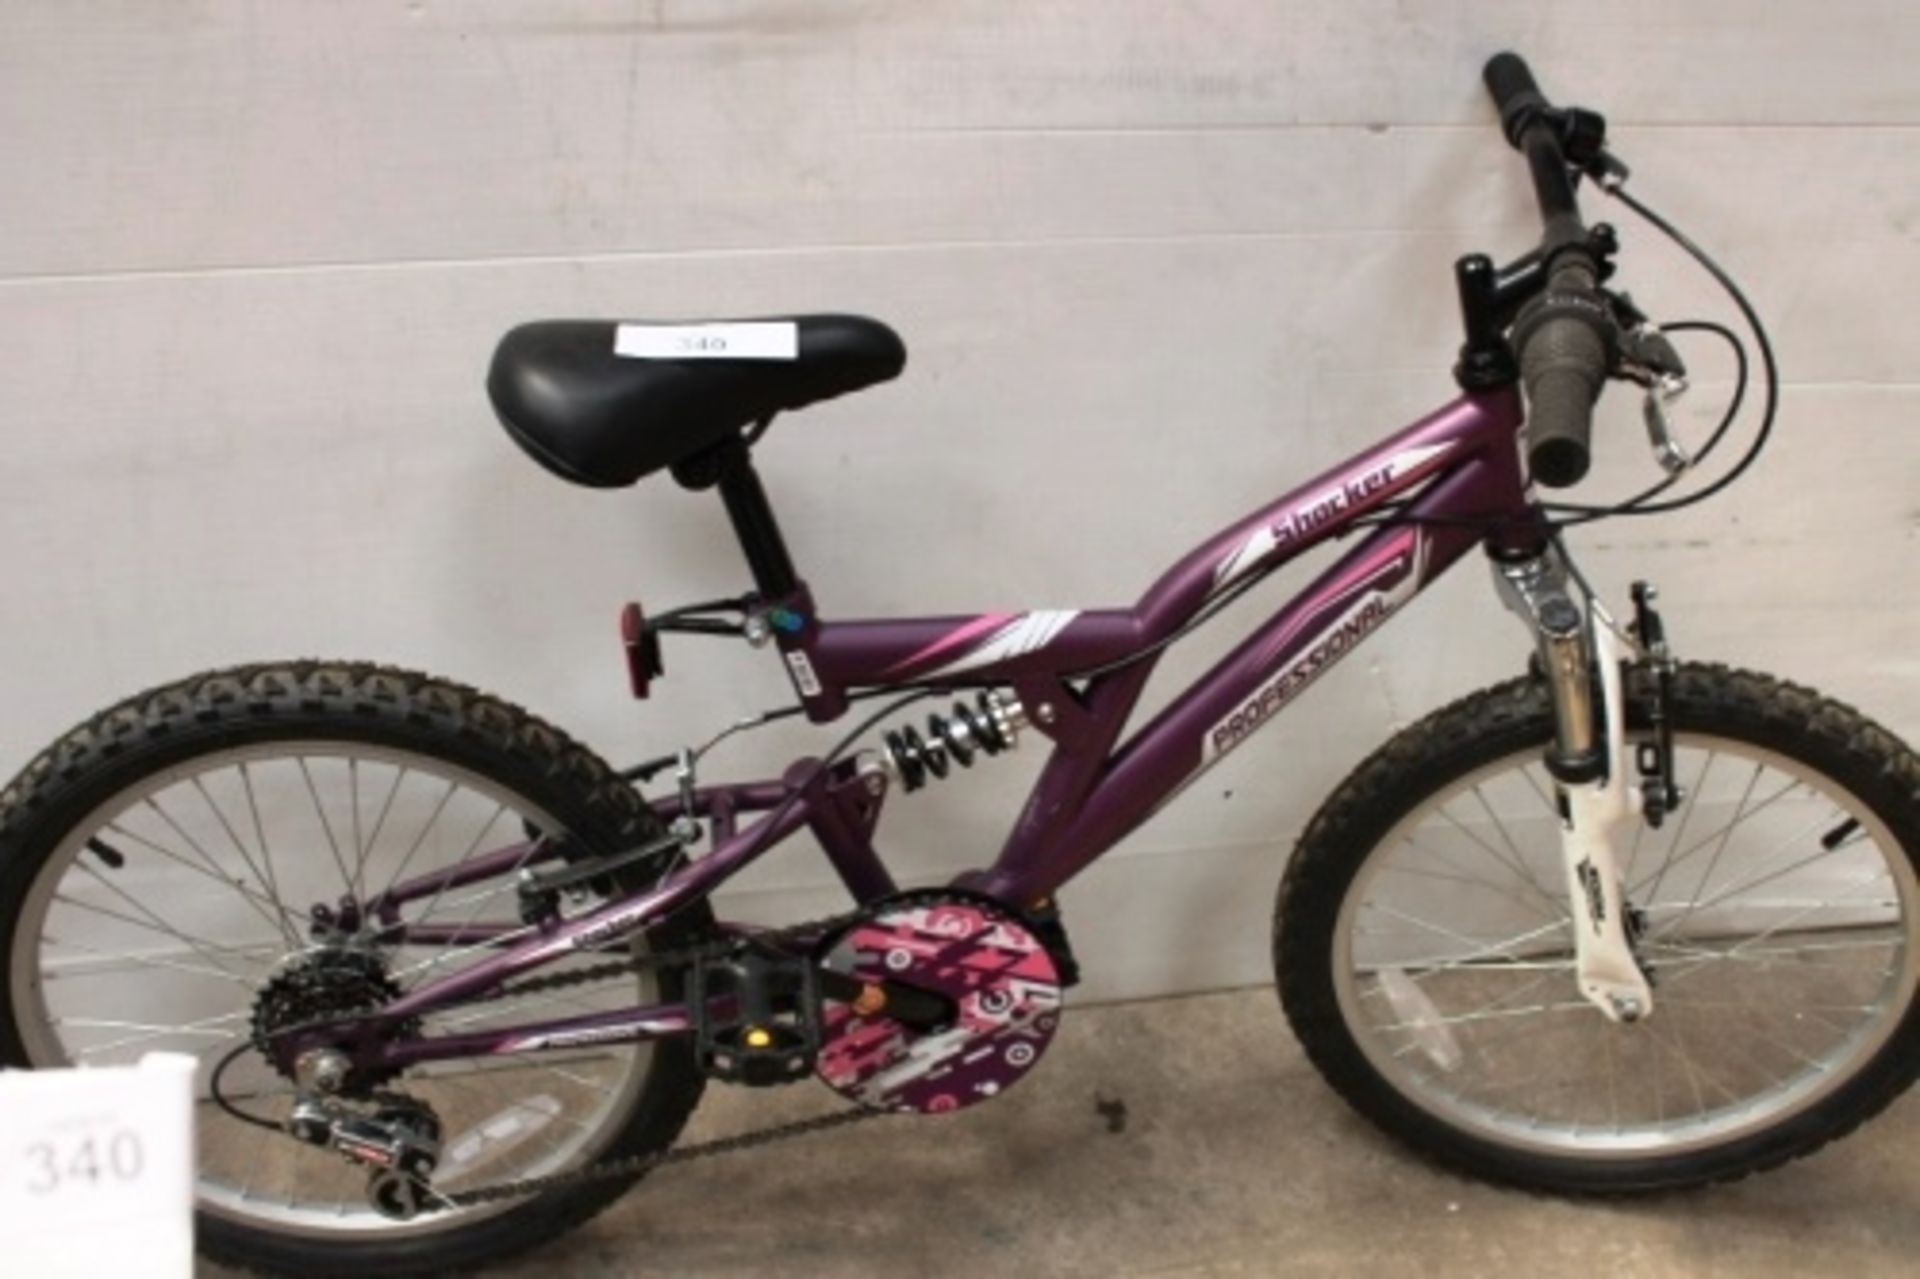 A Shacker Professional child's mountain bike, 12" frame, 19" wheels - New (GS15) - Image 2 of 3